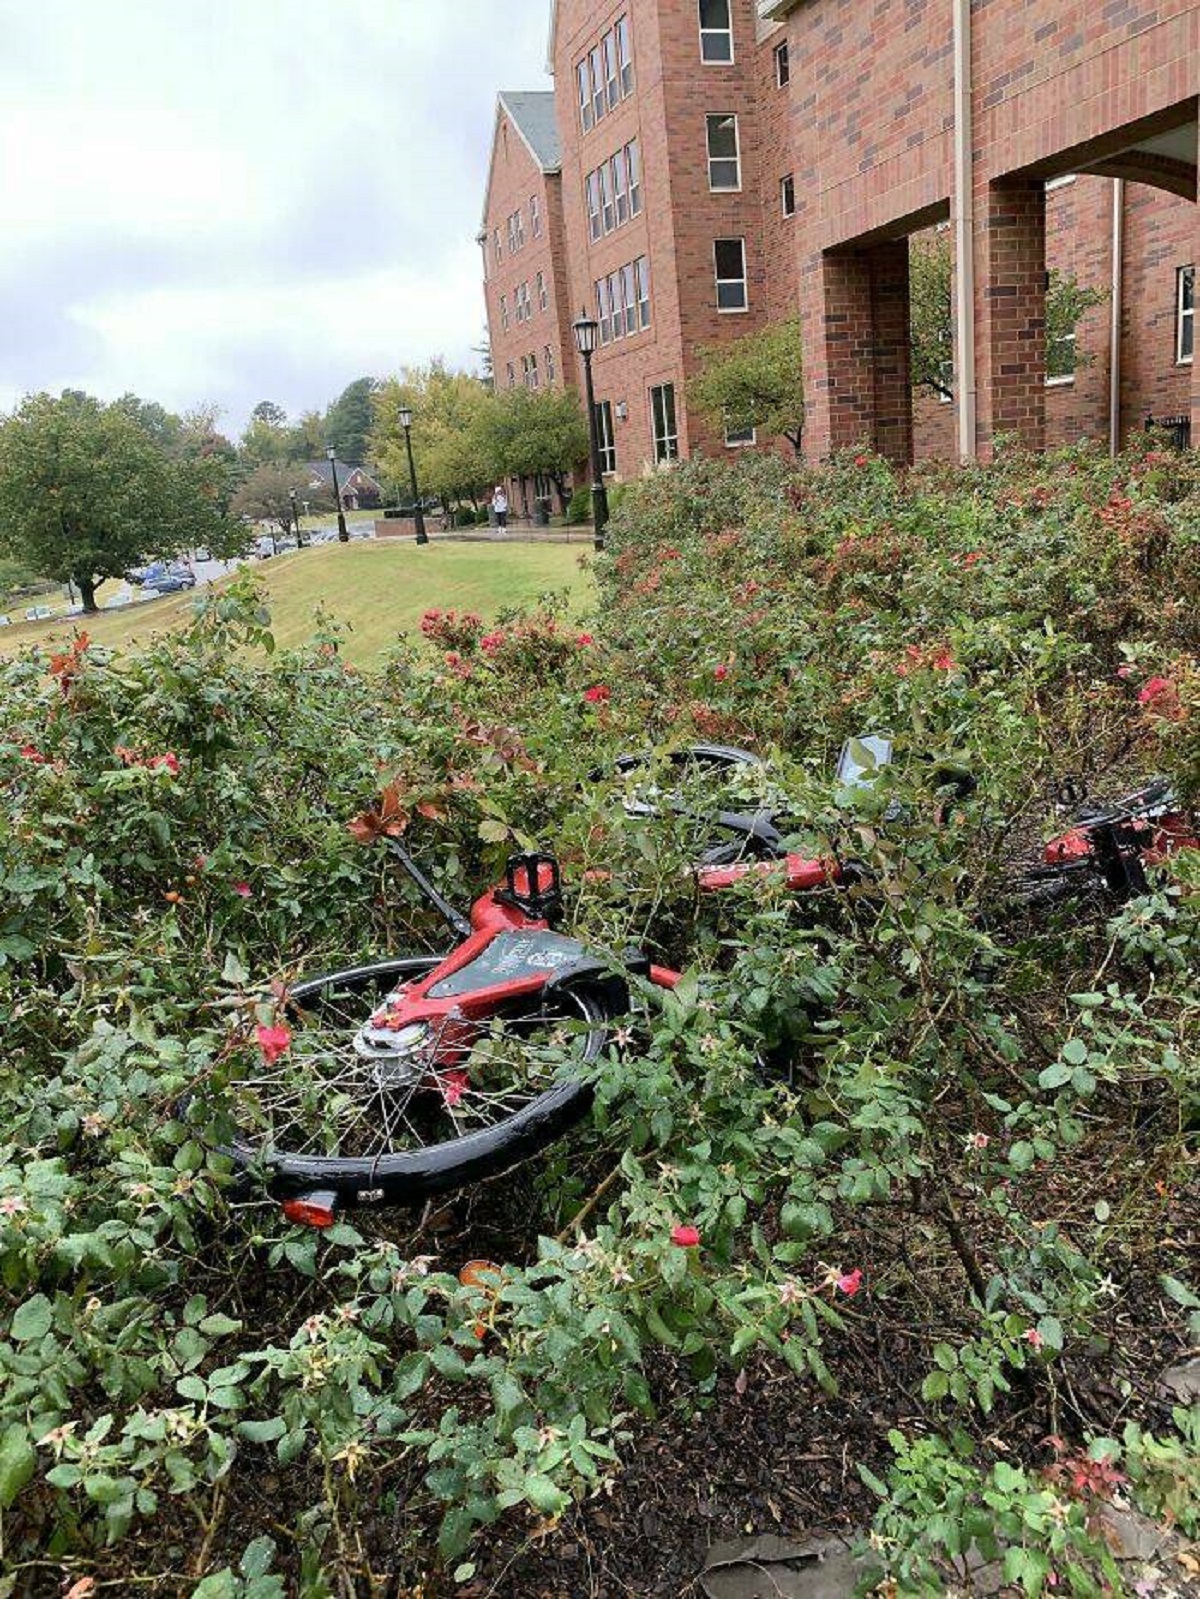 "People At My School Threw The Pay-To-Ride Bikes In The Bushes Instead Of Putting Them Back On The Bike Rack 10 Feet Away"